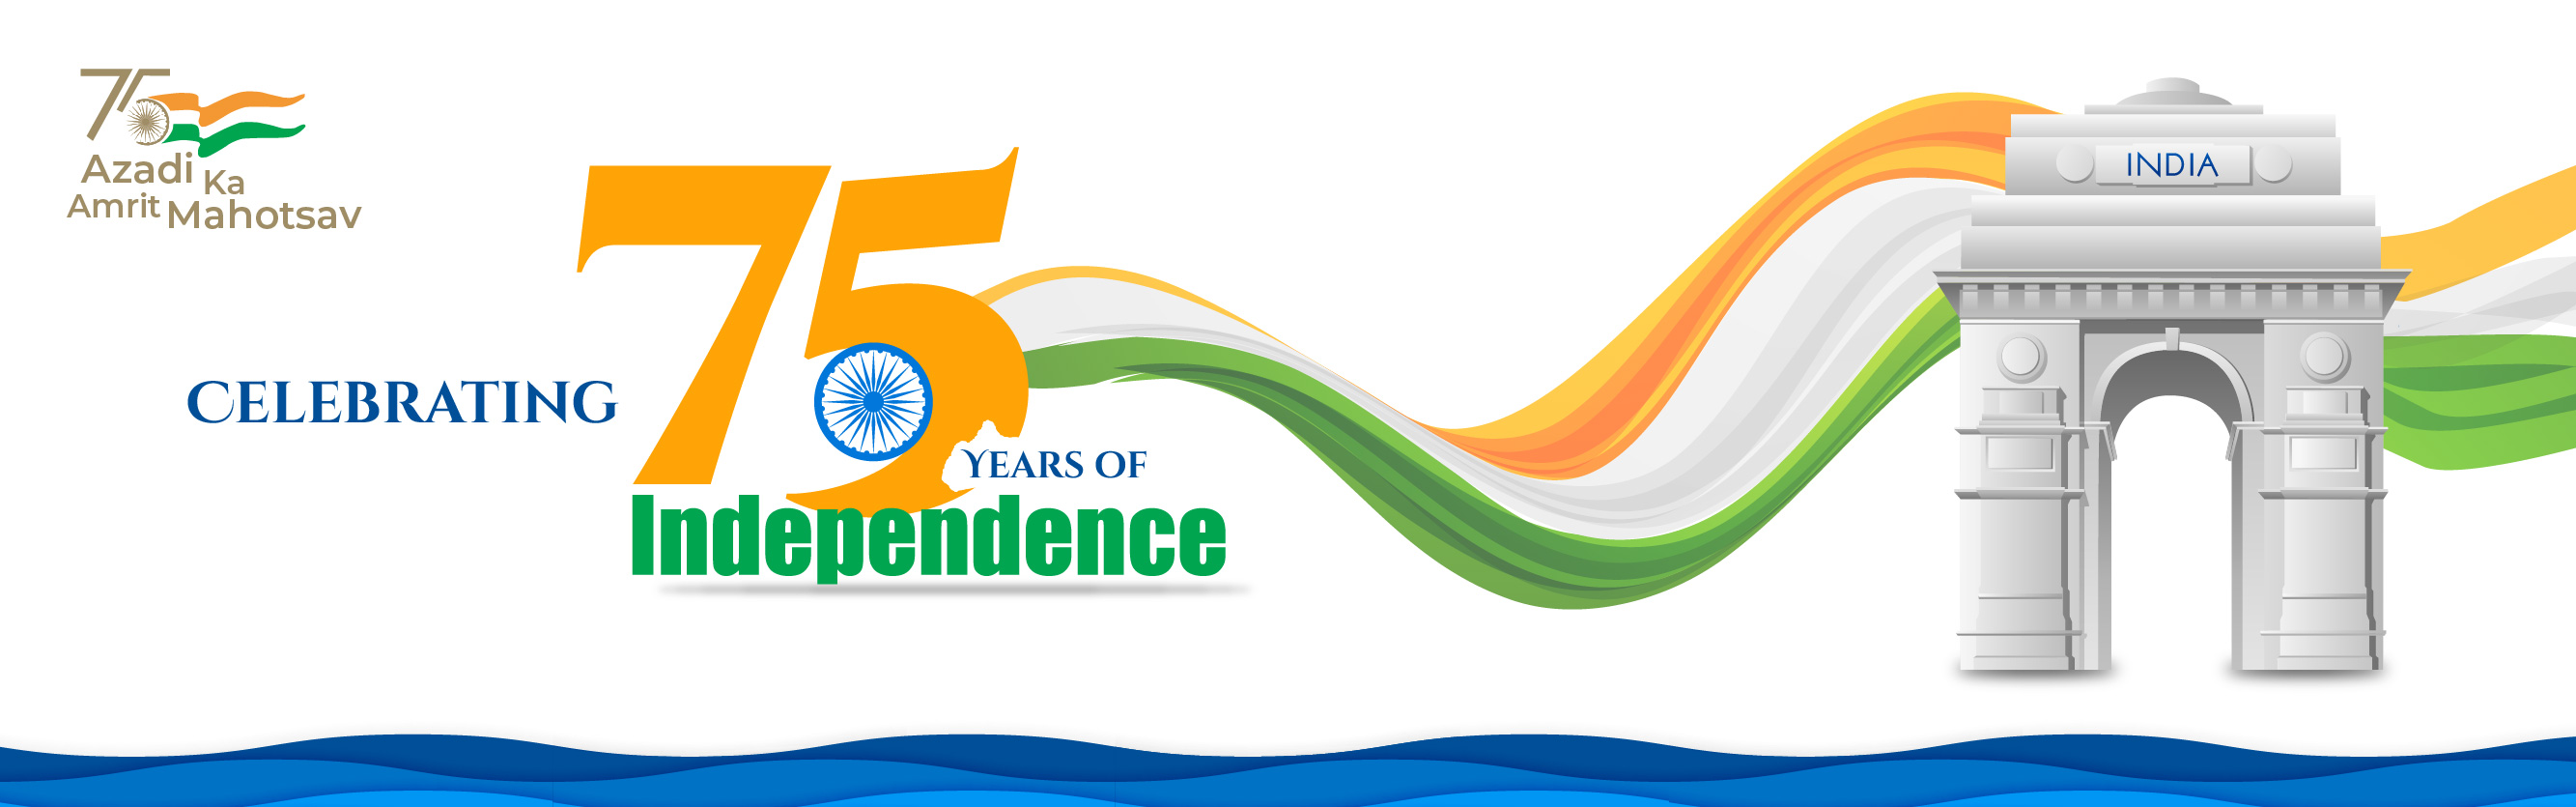 75 years of Independence